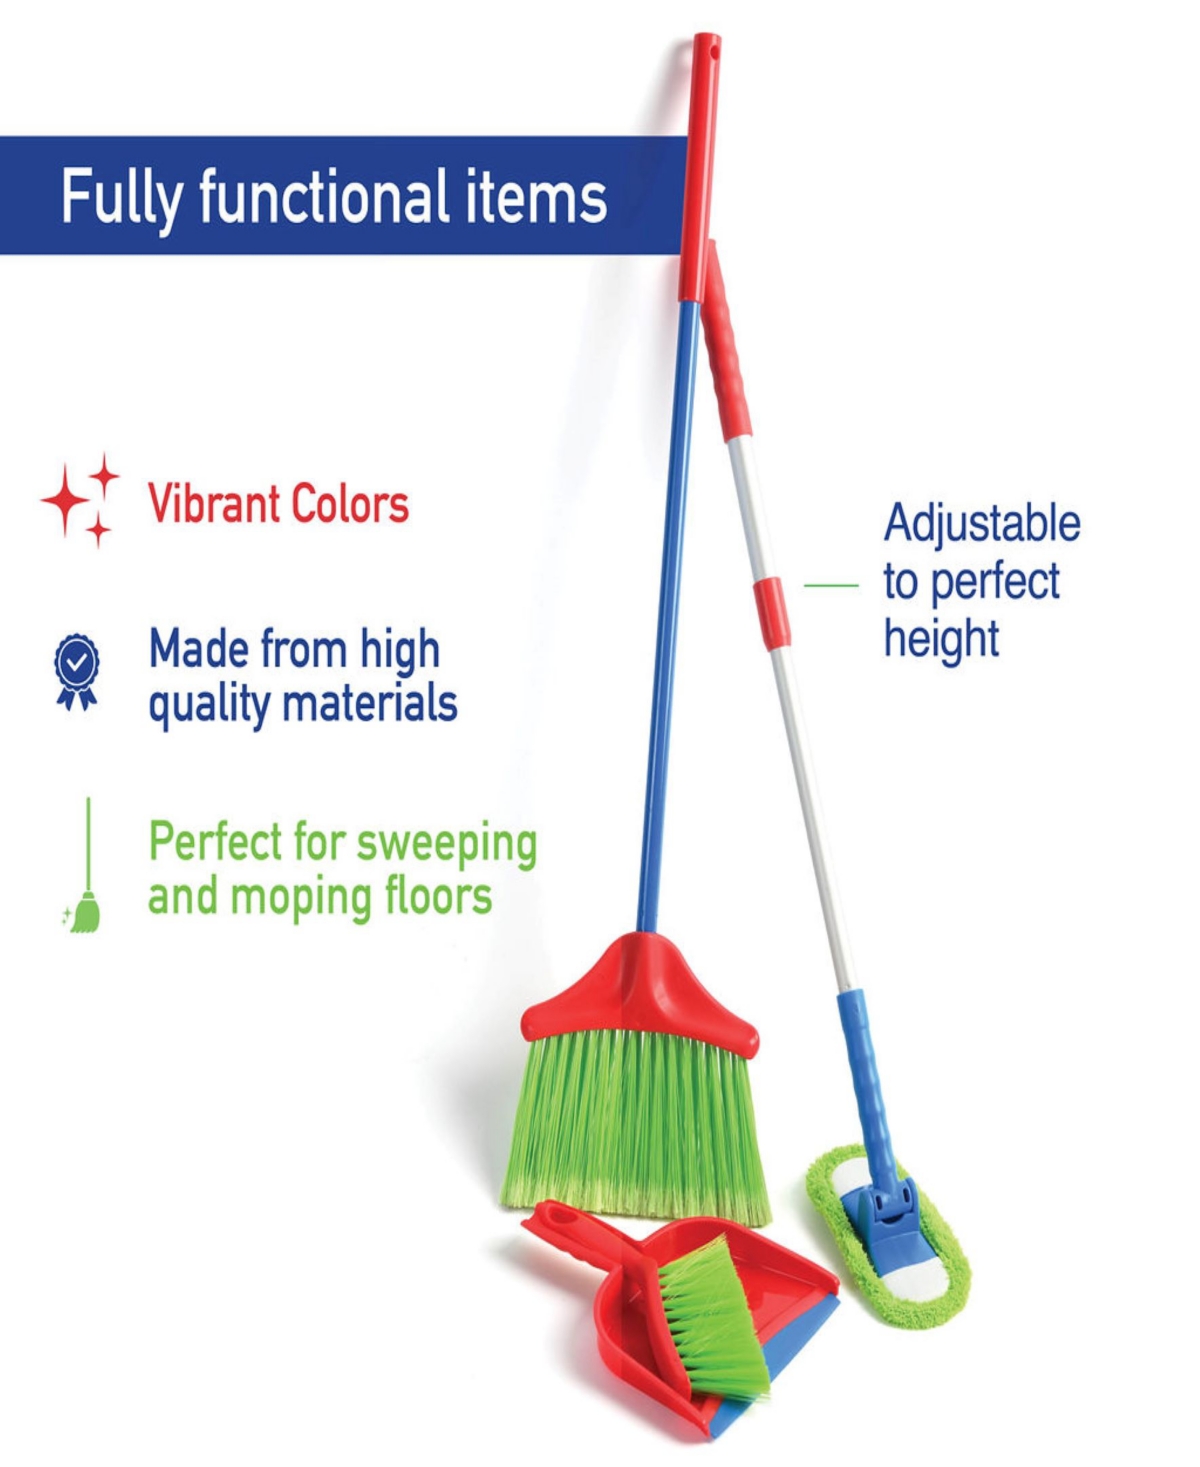 Shop Play22 Kids Cleaning Set Includes Broom, Mop, Brush Dust Pan In Multicolor